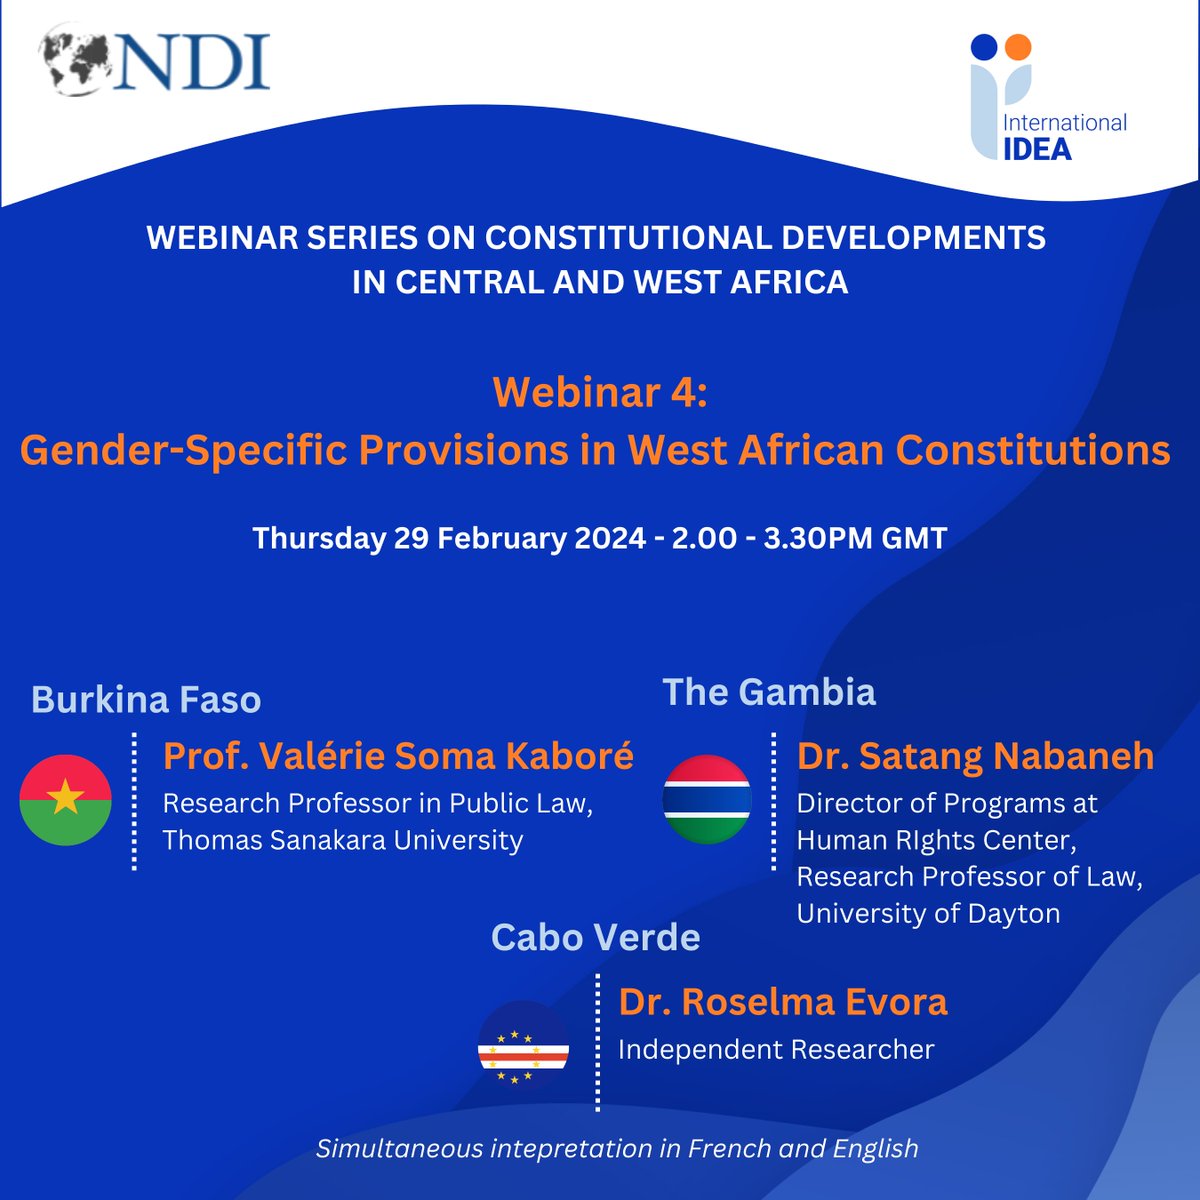 Don't miss @NDI/@ndiafrica & @Int_IDEA's upcoming webinar on the links between #constitutions, legal texts & #GenderEquality in 🇧🇫#BurkinaFaso, 🇬🇲#TheGambia & 🇨🇻#CaboVerde! 🗓️: This Thursday, Feb. 29 ⏰: 9:00am ET ✅Register here: bit.ly/3IcSqh0